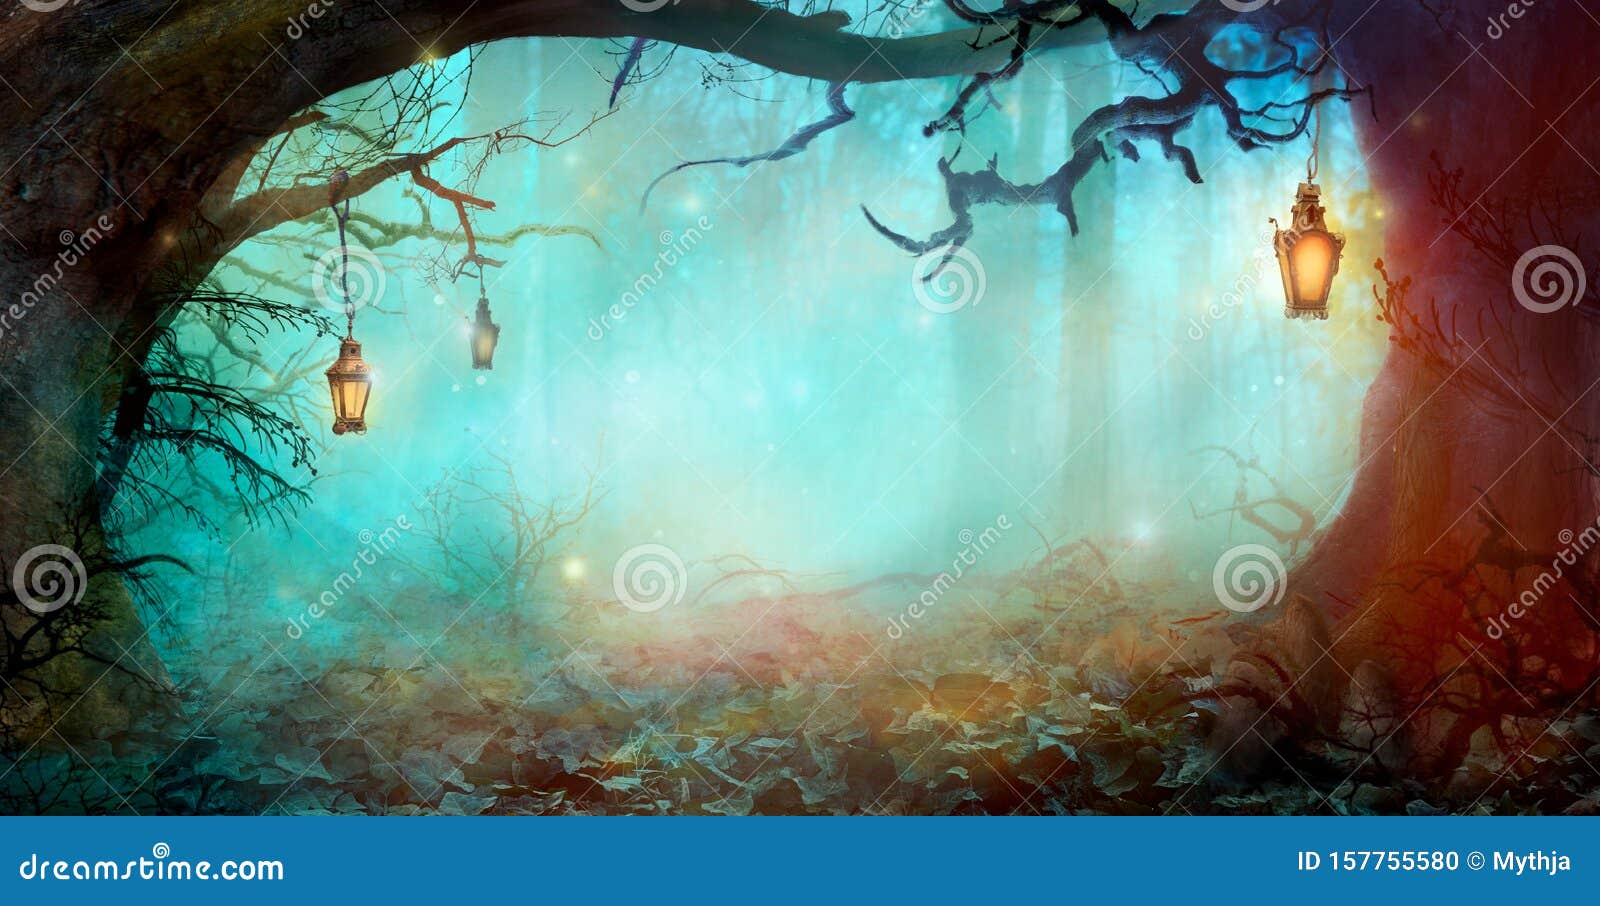 halloween  in magical forest